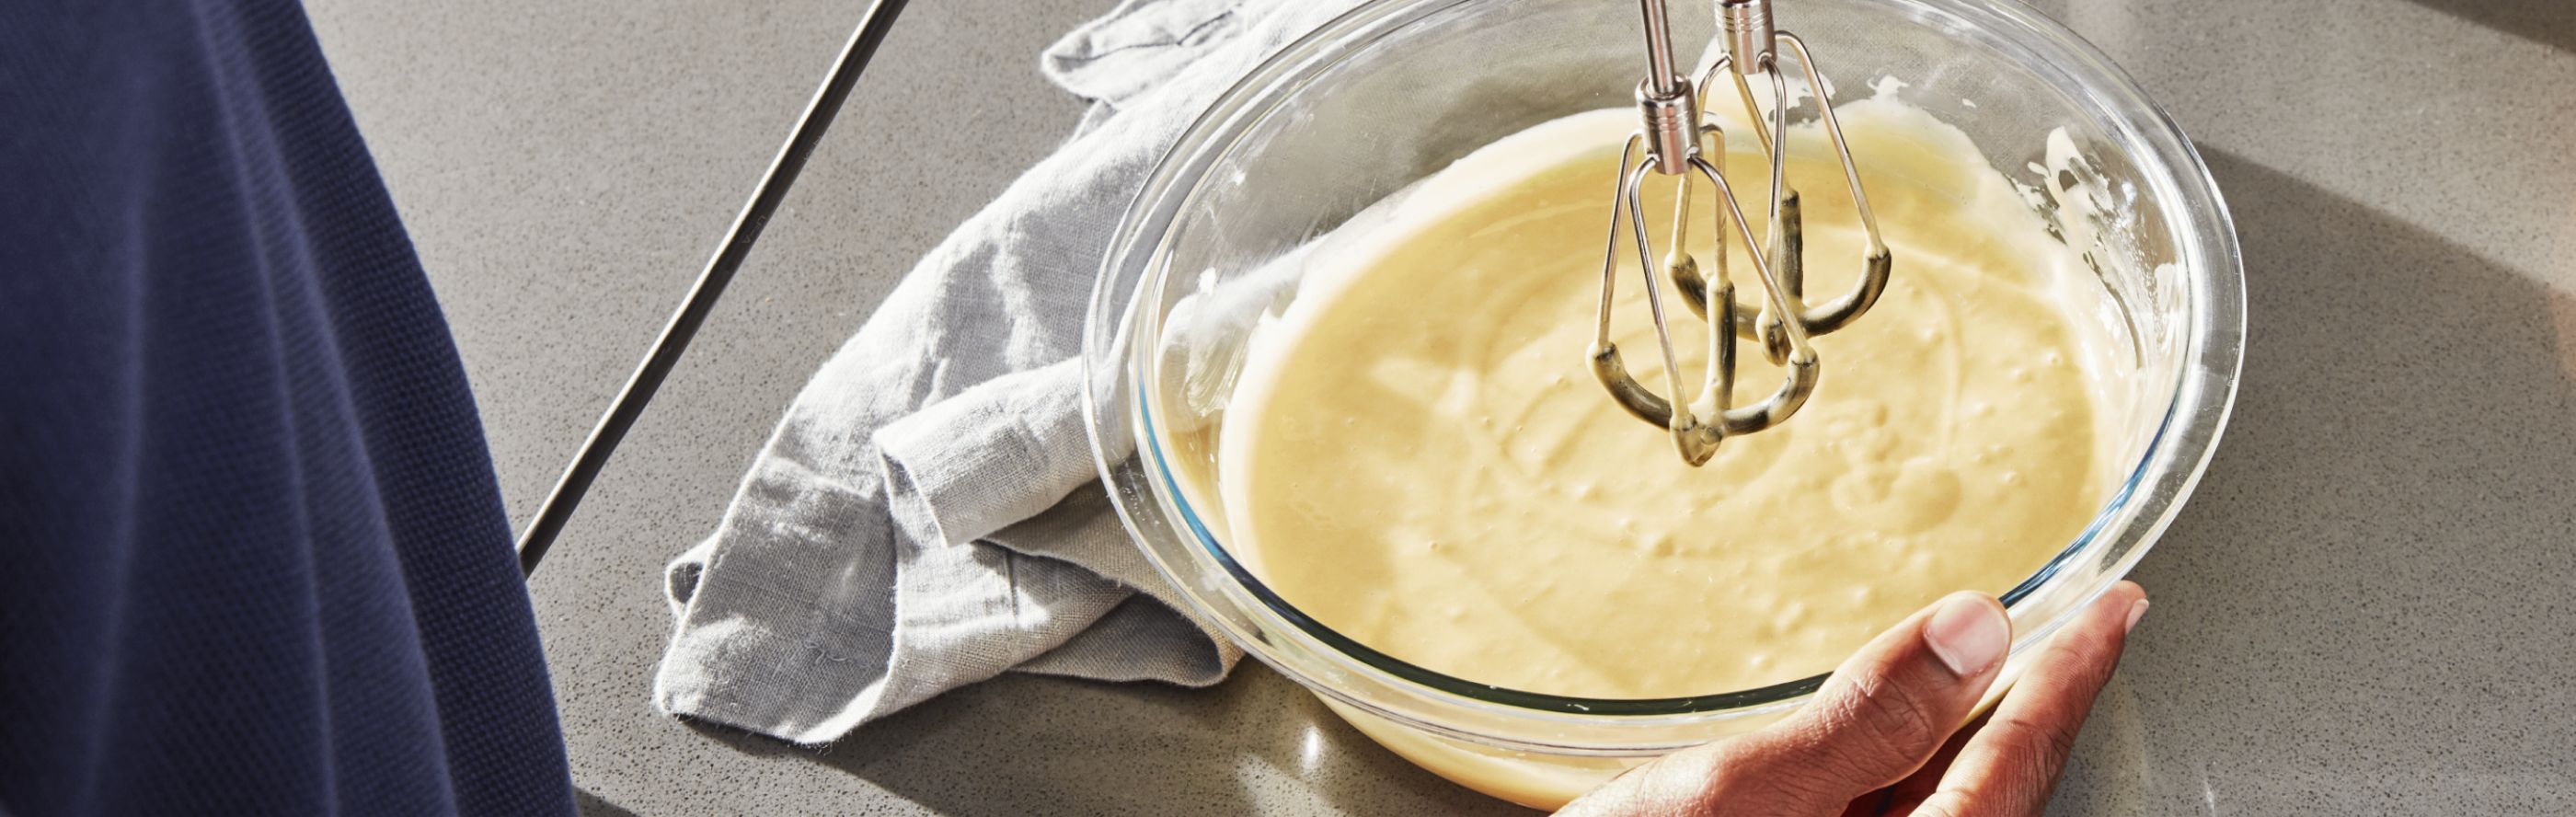 Person using hand mixer to mix white queso in glass bowl